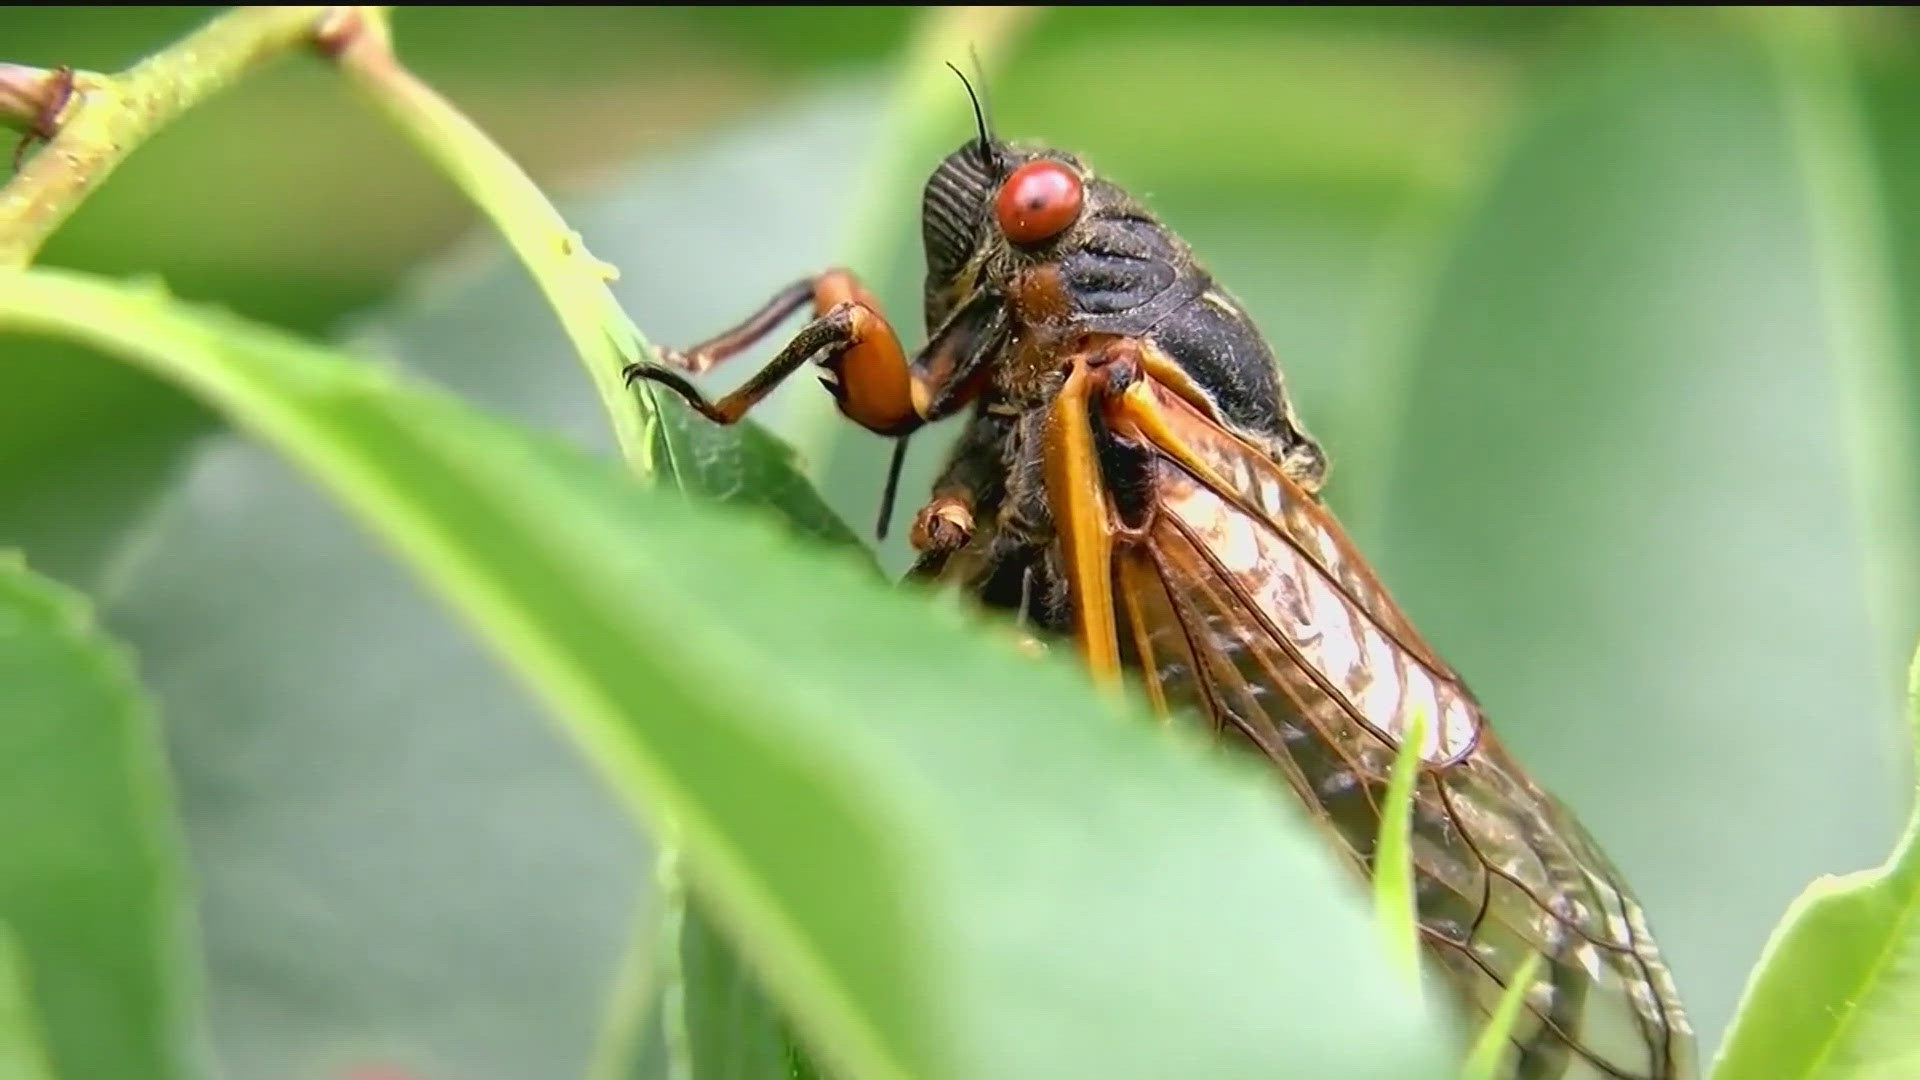 In the next few weeks, two different sets of cicadas are getting ready to emerge.